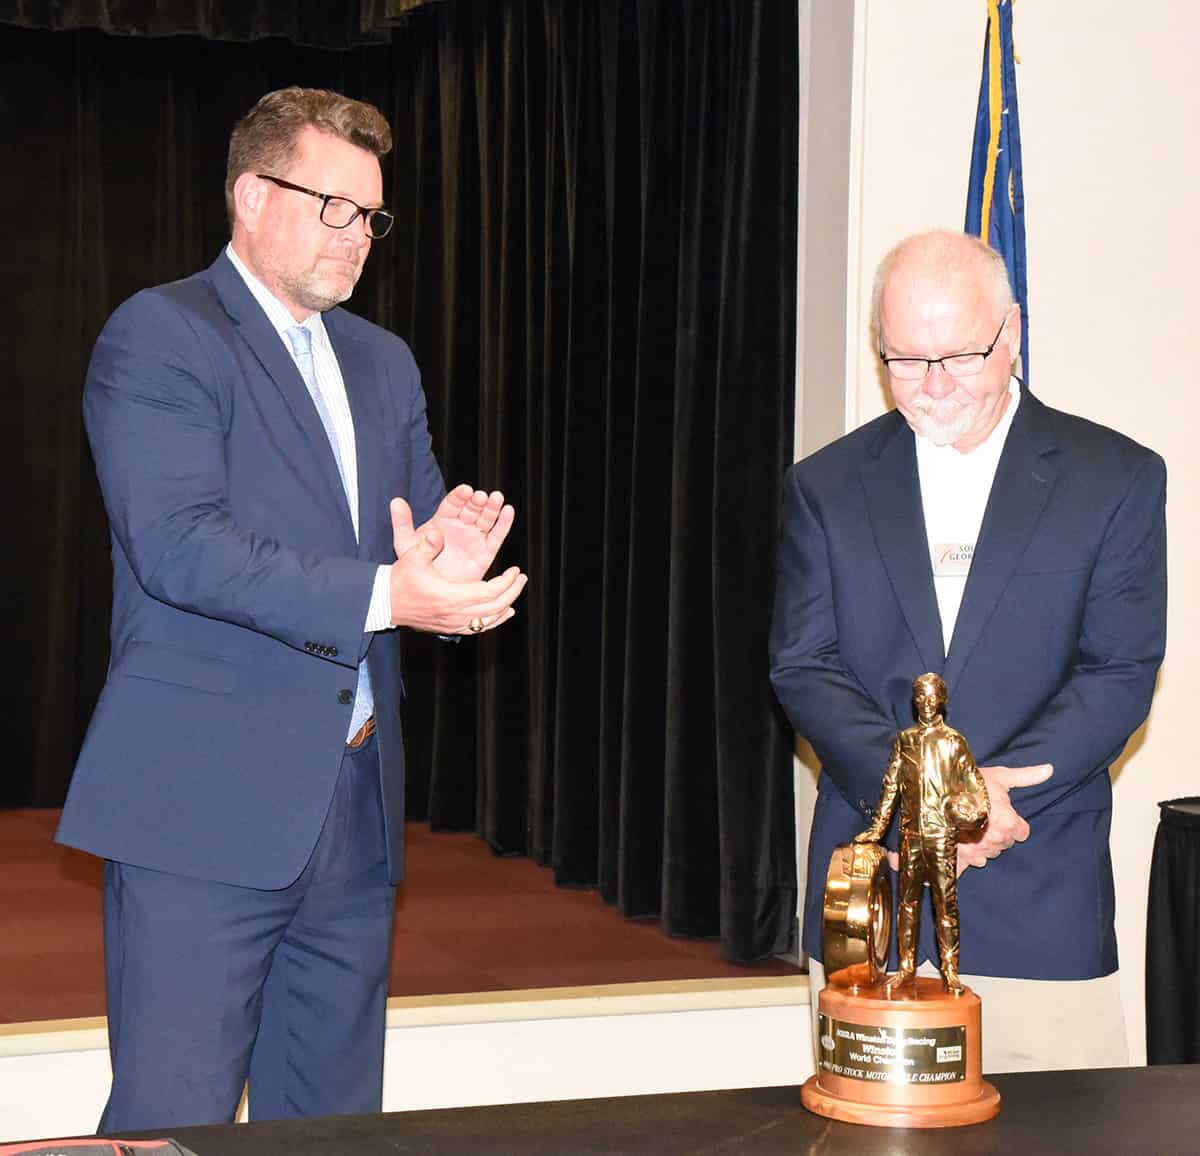 South Georgia Technical College President Dr. John Watford (l), is shown above thanking George Bryce (r) of Star Racing for his service to the South Georgia Technical College Board of Directors and for the gift of the National Championship ‘Wally’ trophy to the college as a symbol of partnership between Star Racing and the college.